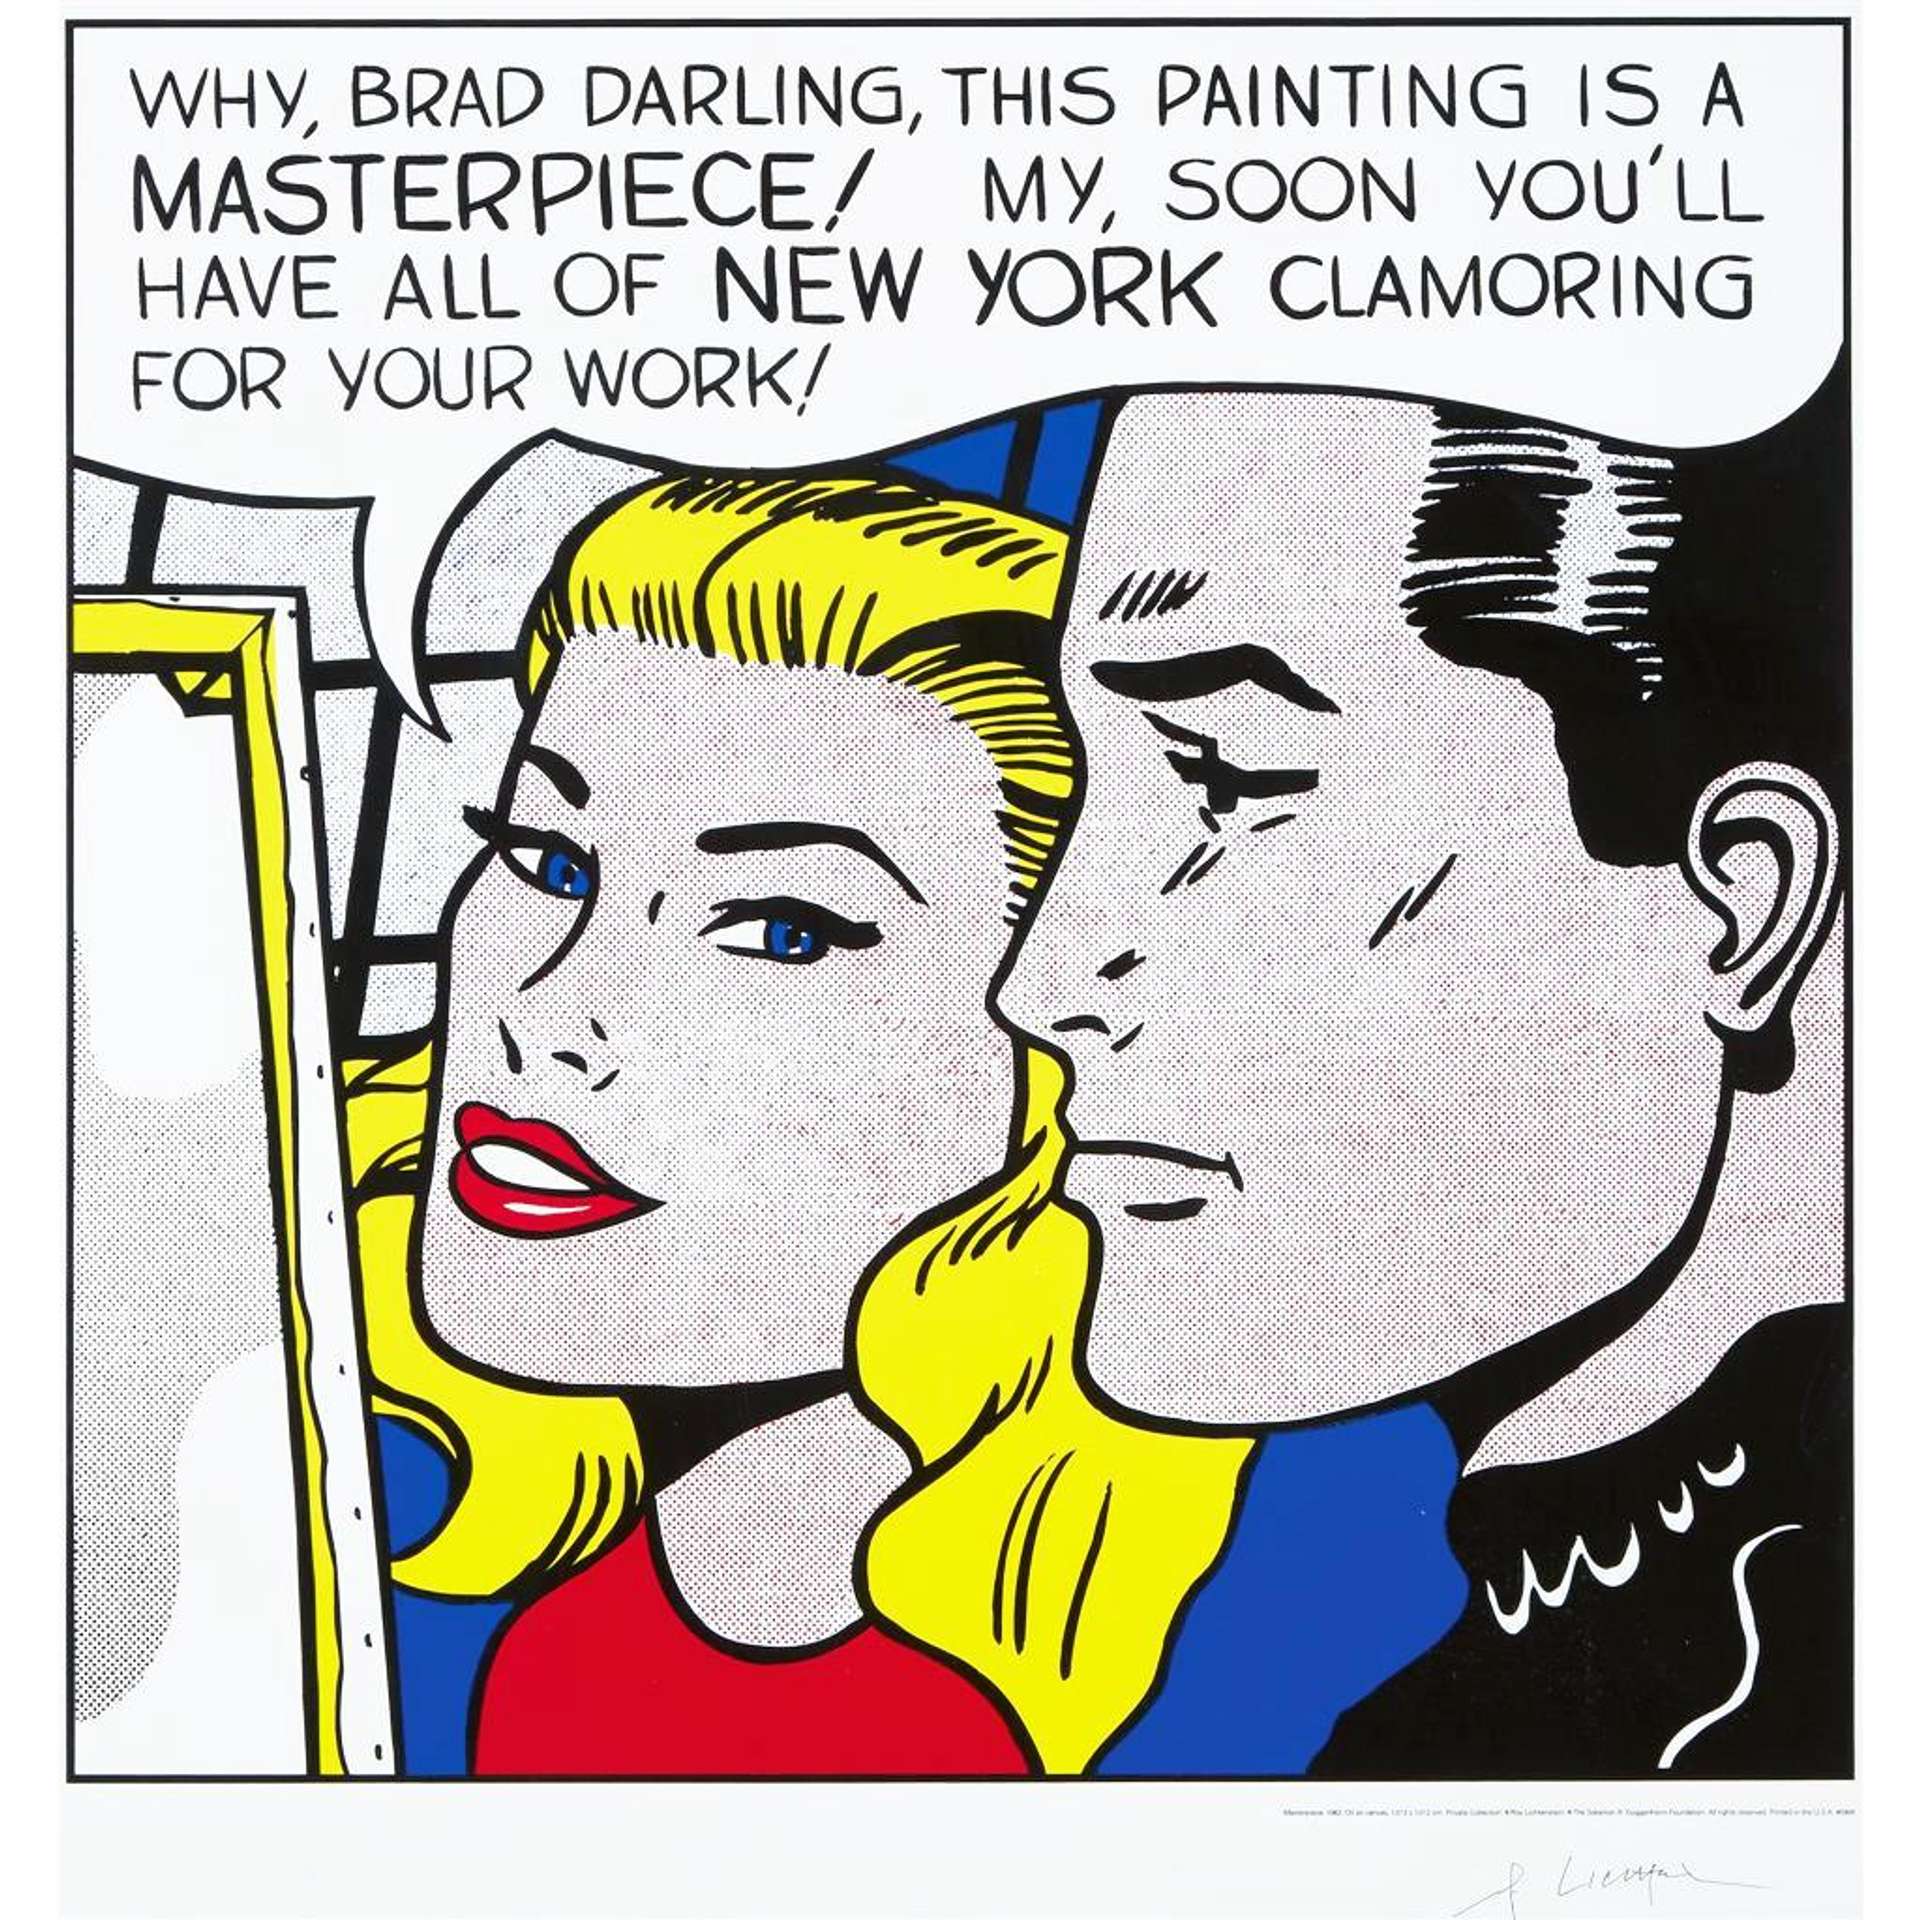 A Pop Art lithograph of a comic strip of a woman with blonde hair, next to a man in an interior setting with a painting. There is text above her that reads “WHY BRAD DARLING, THIS PAINTING IS A MASTERPIECE! MY, SOON YOU’LL HAVE ALL OF NEW YORK CLAMORING FOR YOUR WORK!”